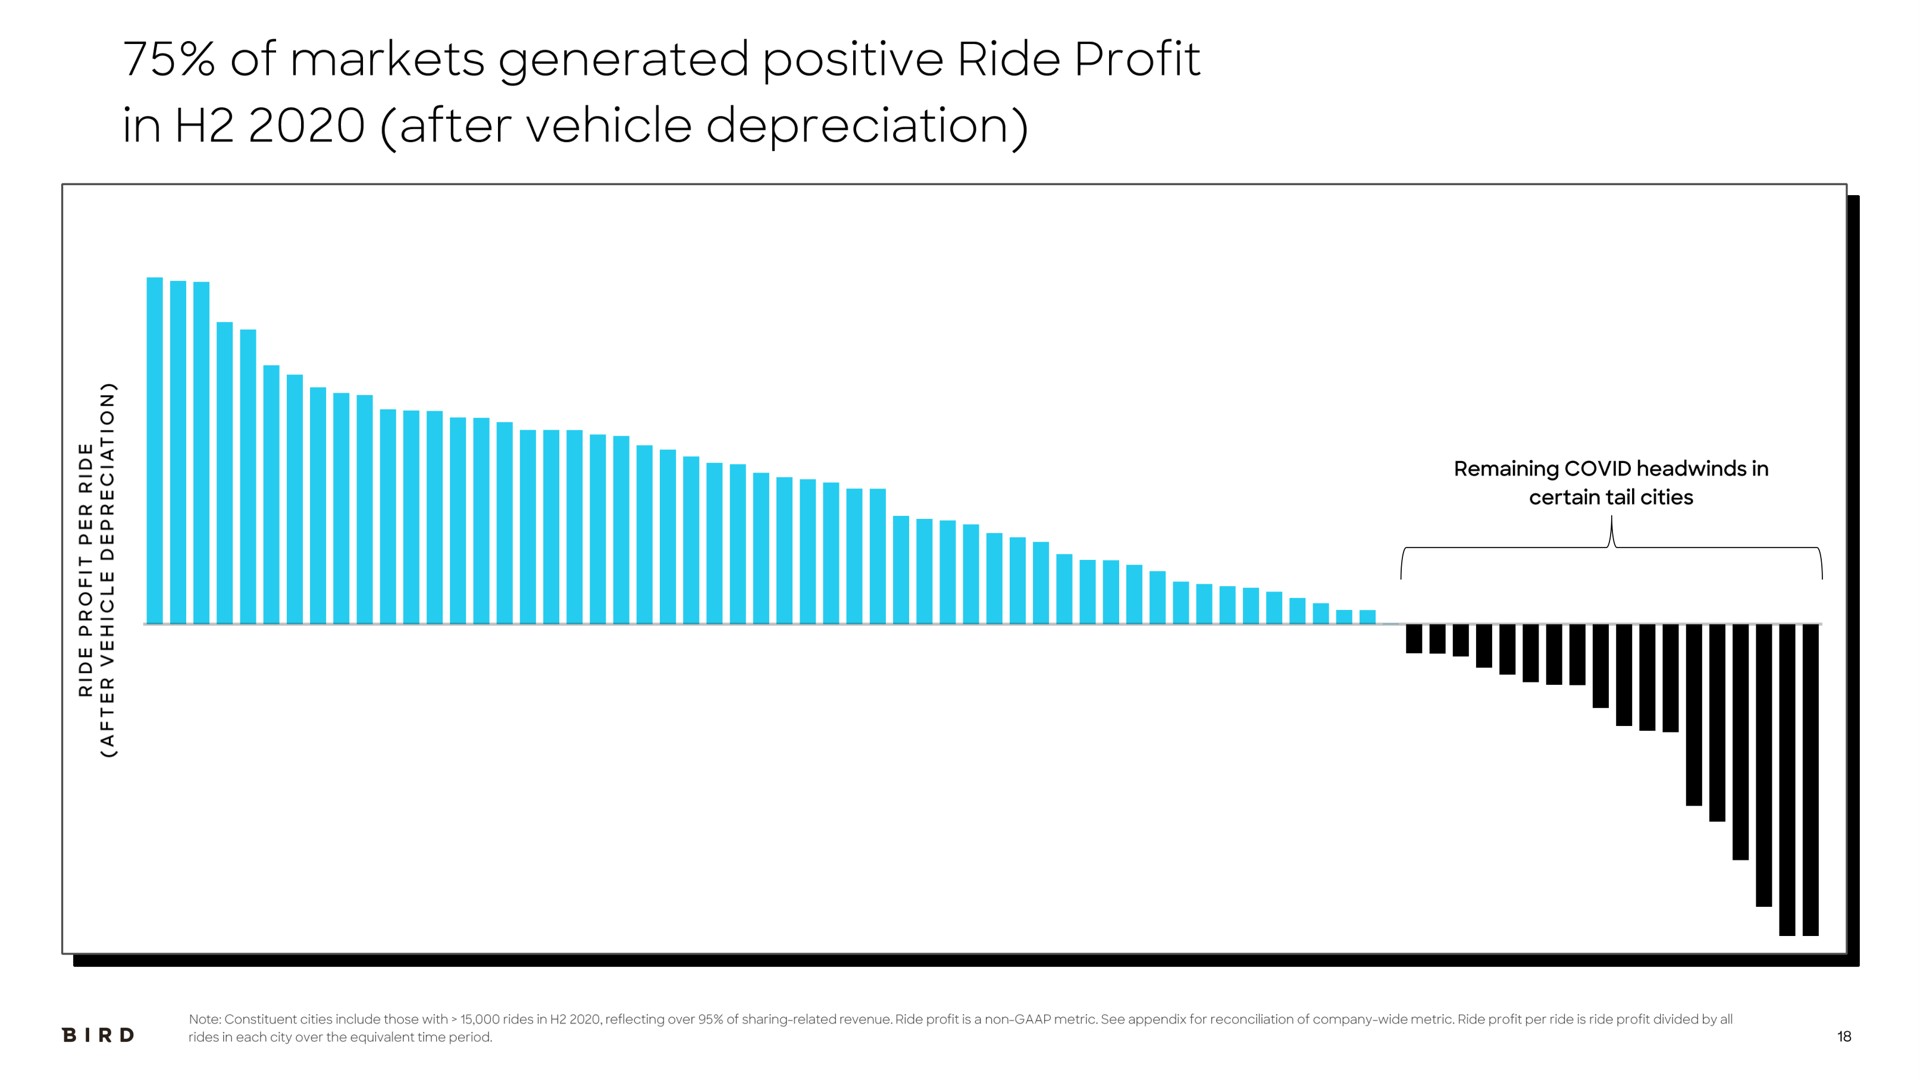 of markets generated positive ride profit in after vehicle depreciation | Bird